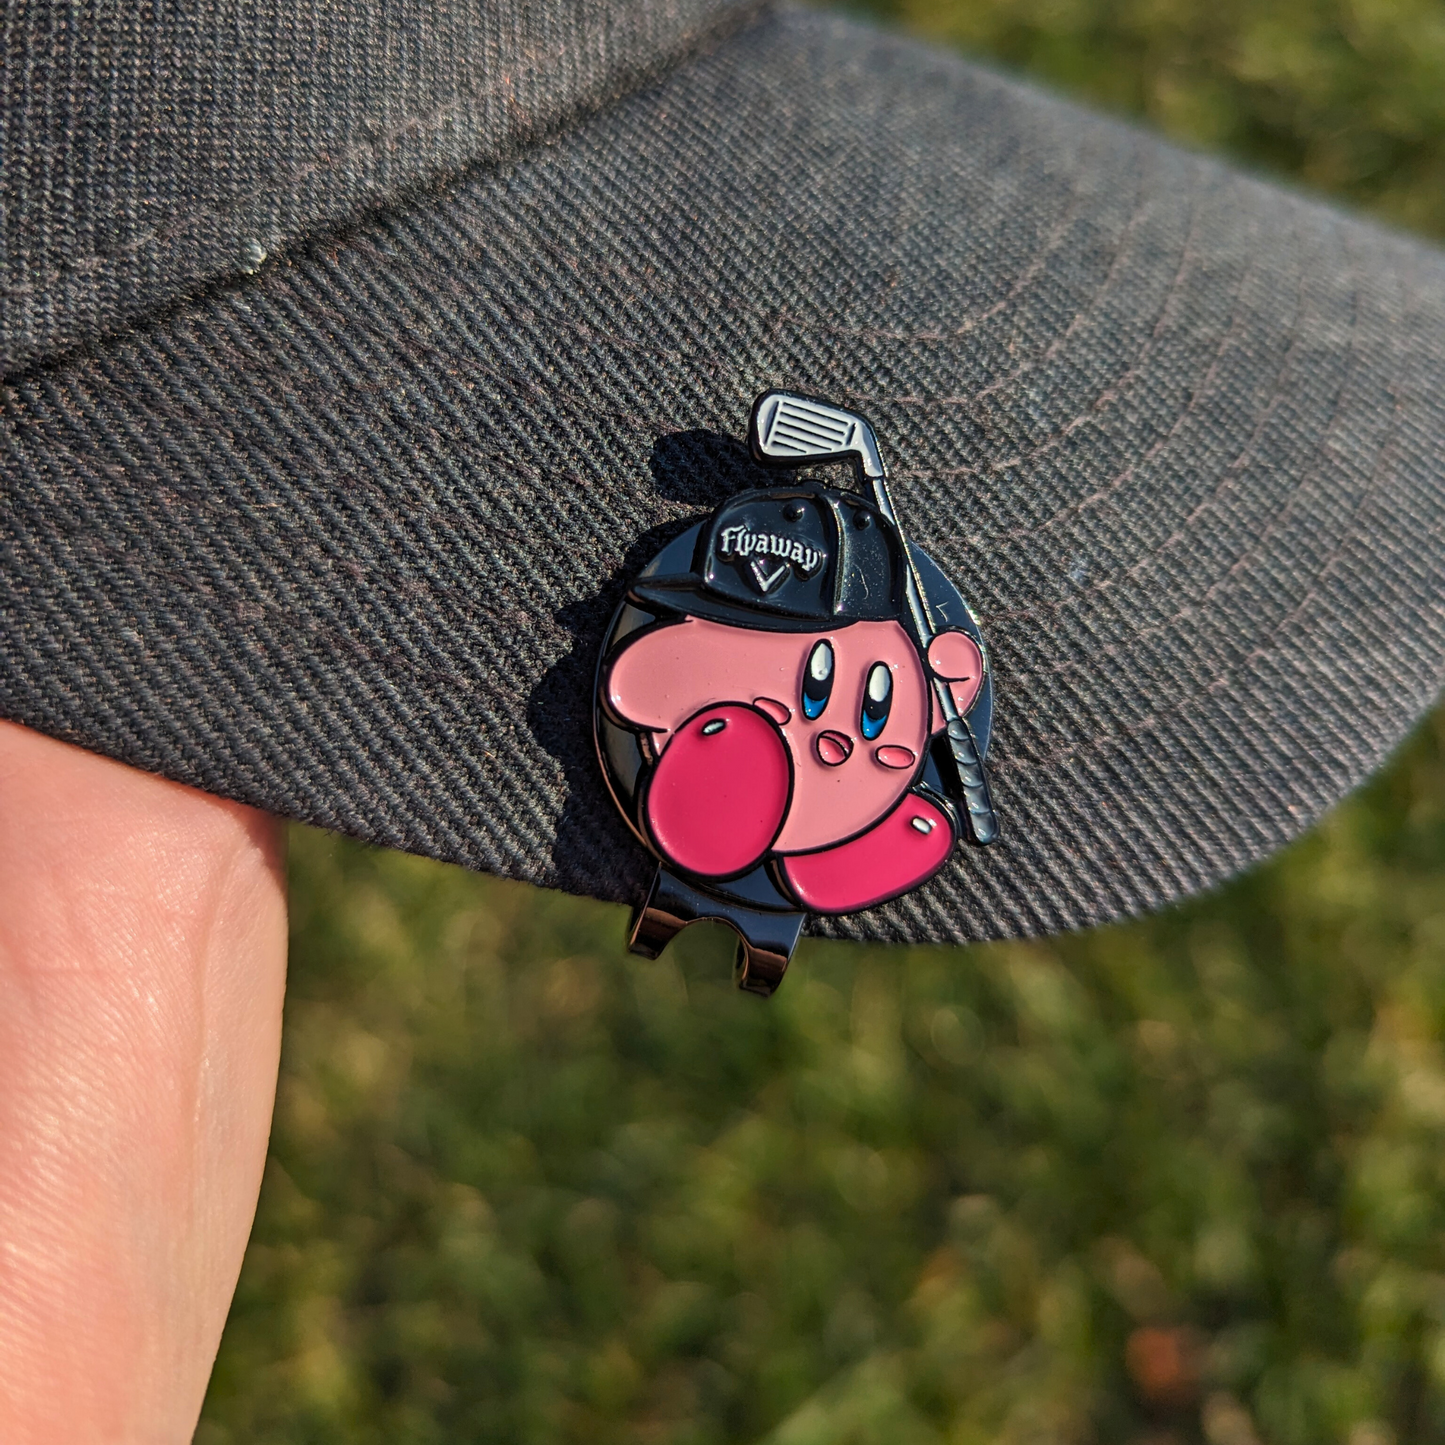 pink kirby video game character wearing flyaway hat and holding golf club golf ball marker clipped to hat